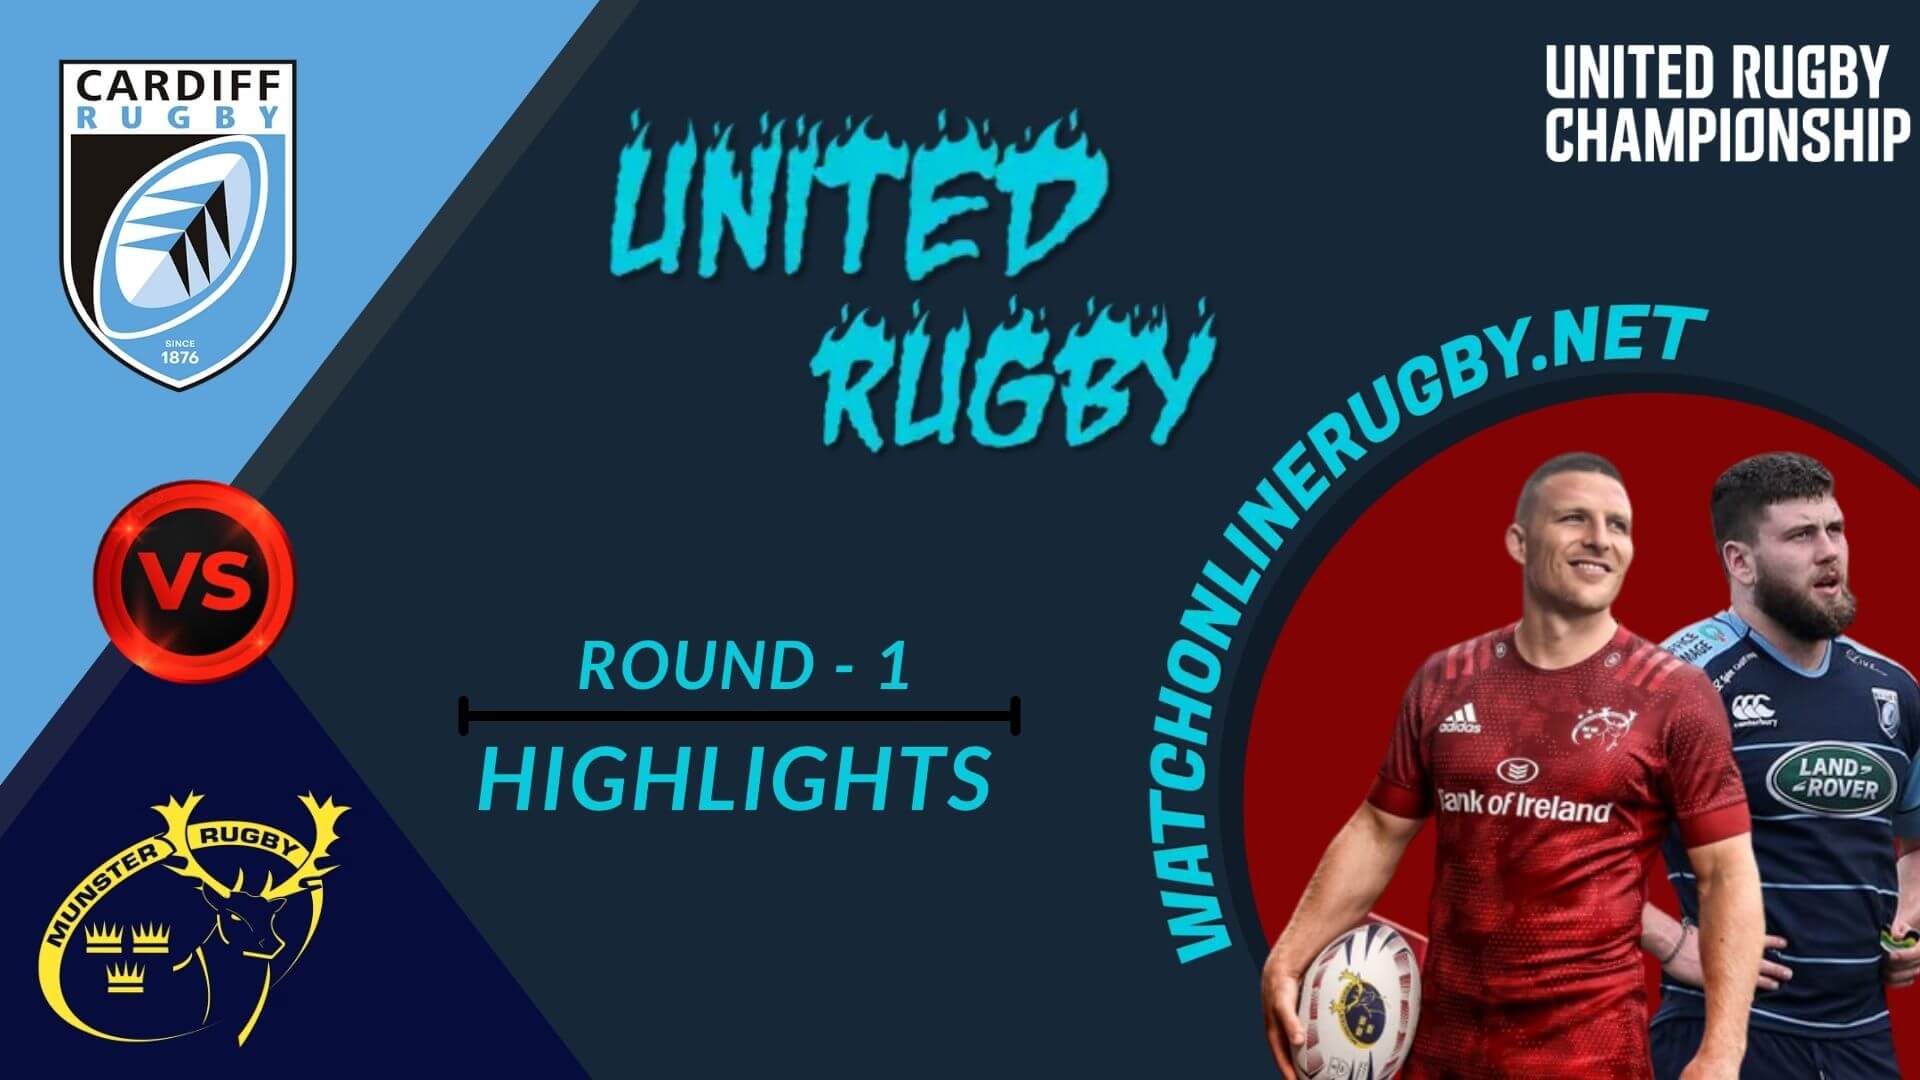 Cardiff Rugby Vs Munster United Rugby 2022 RD 1